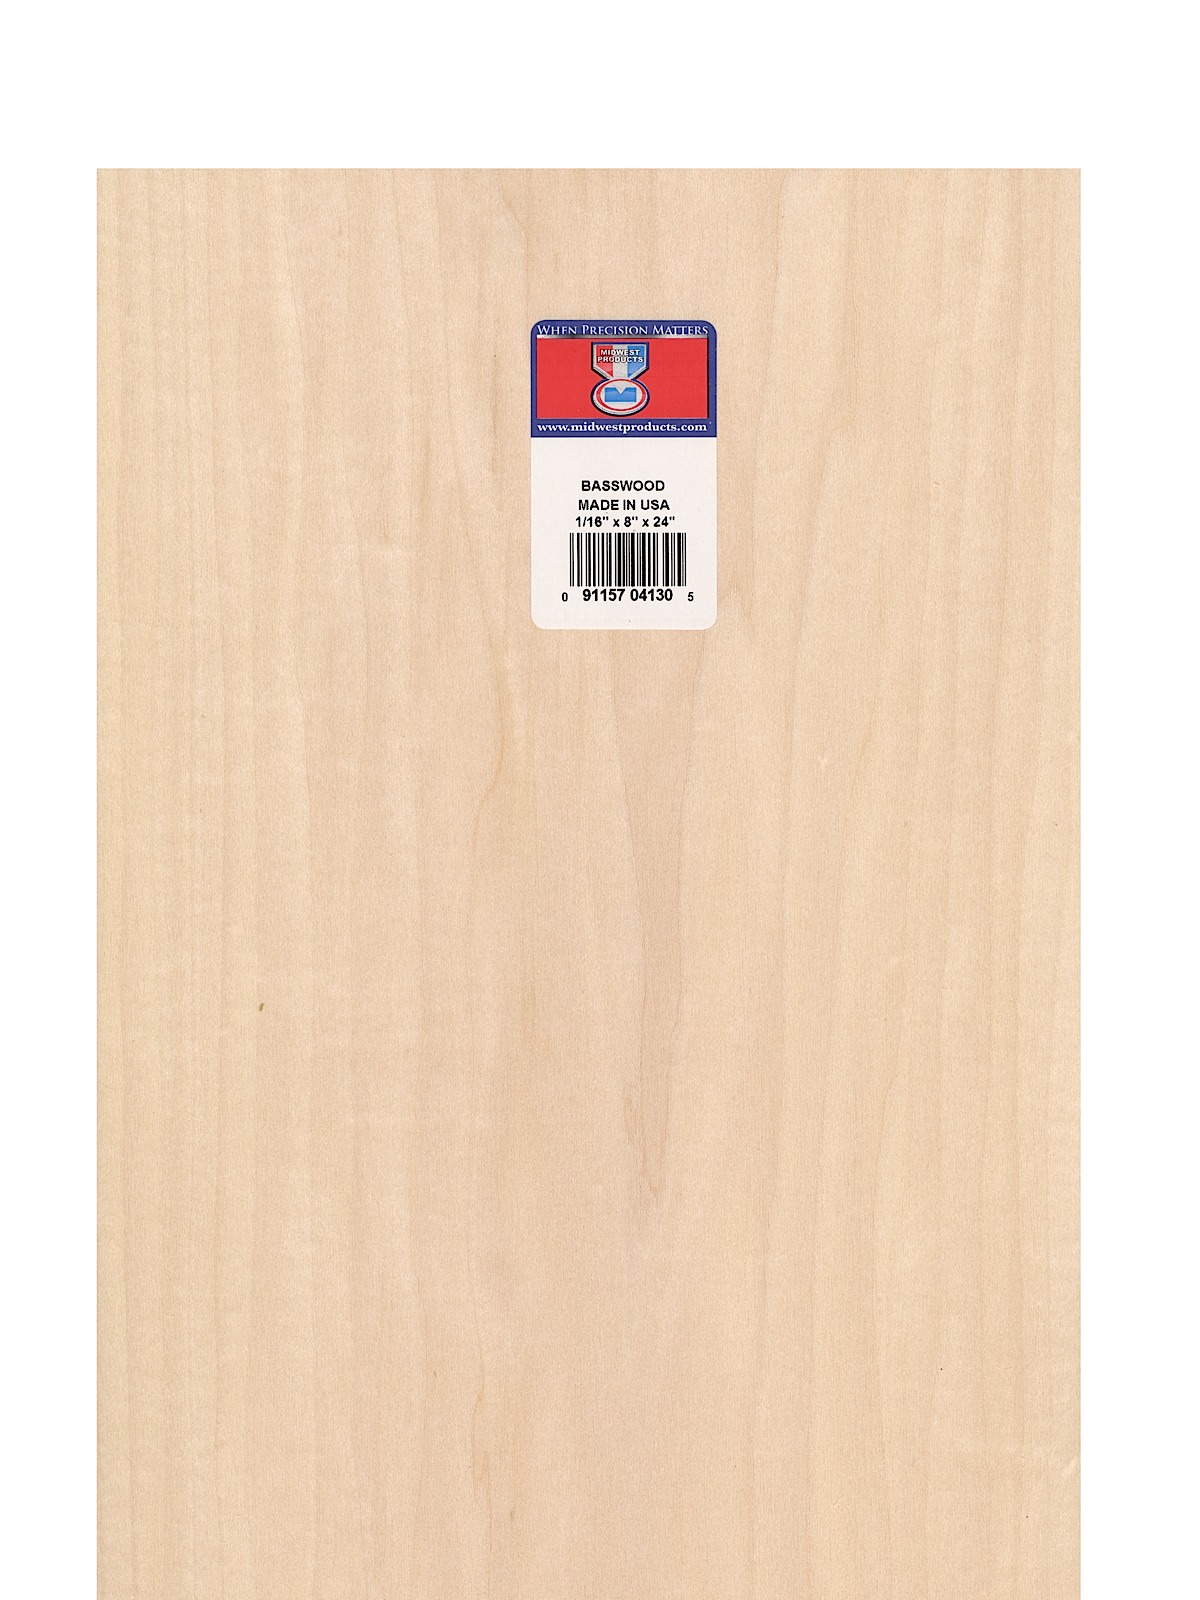 Basswood Sheets 1 16 In. 8 In. X 24 In.